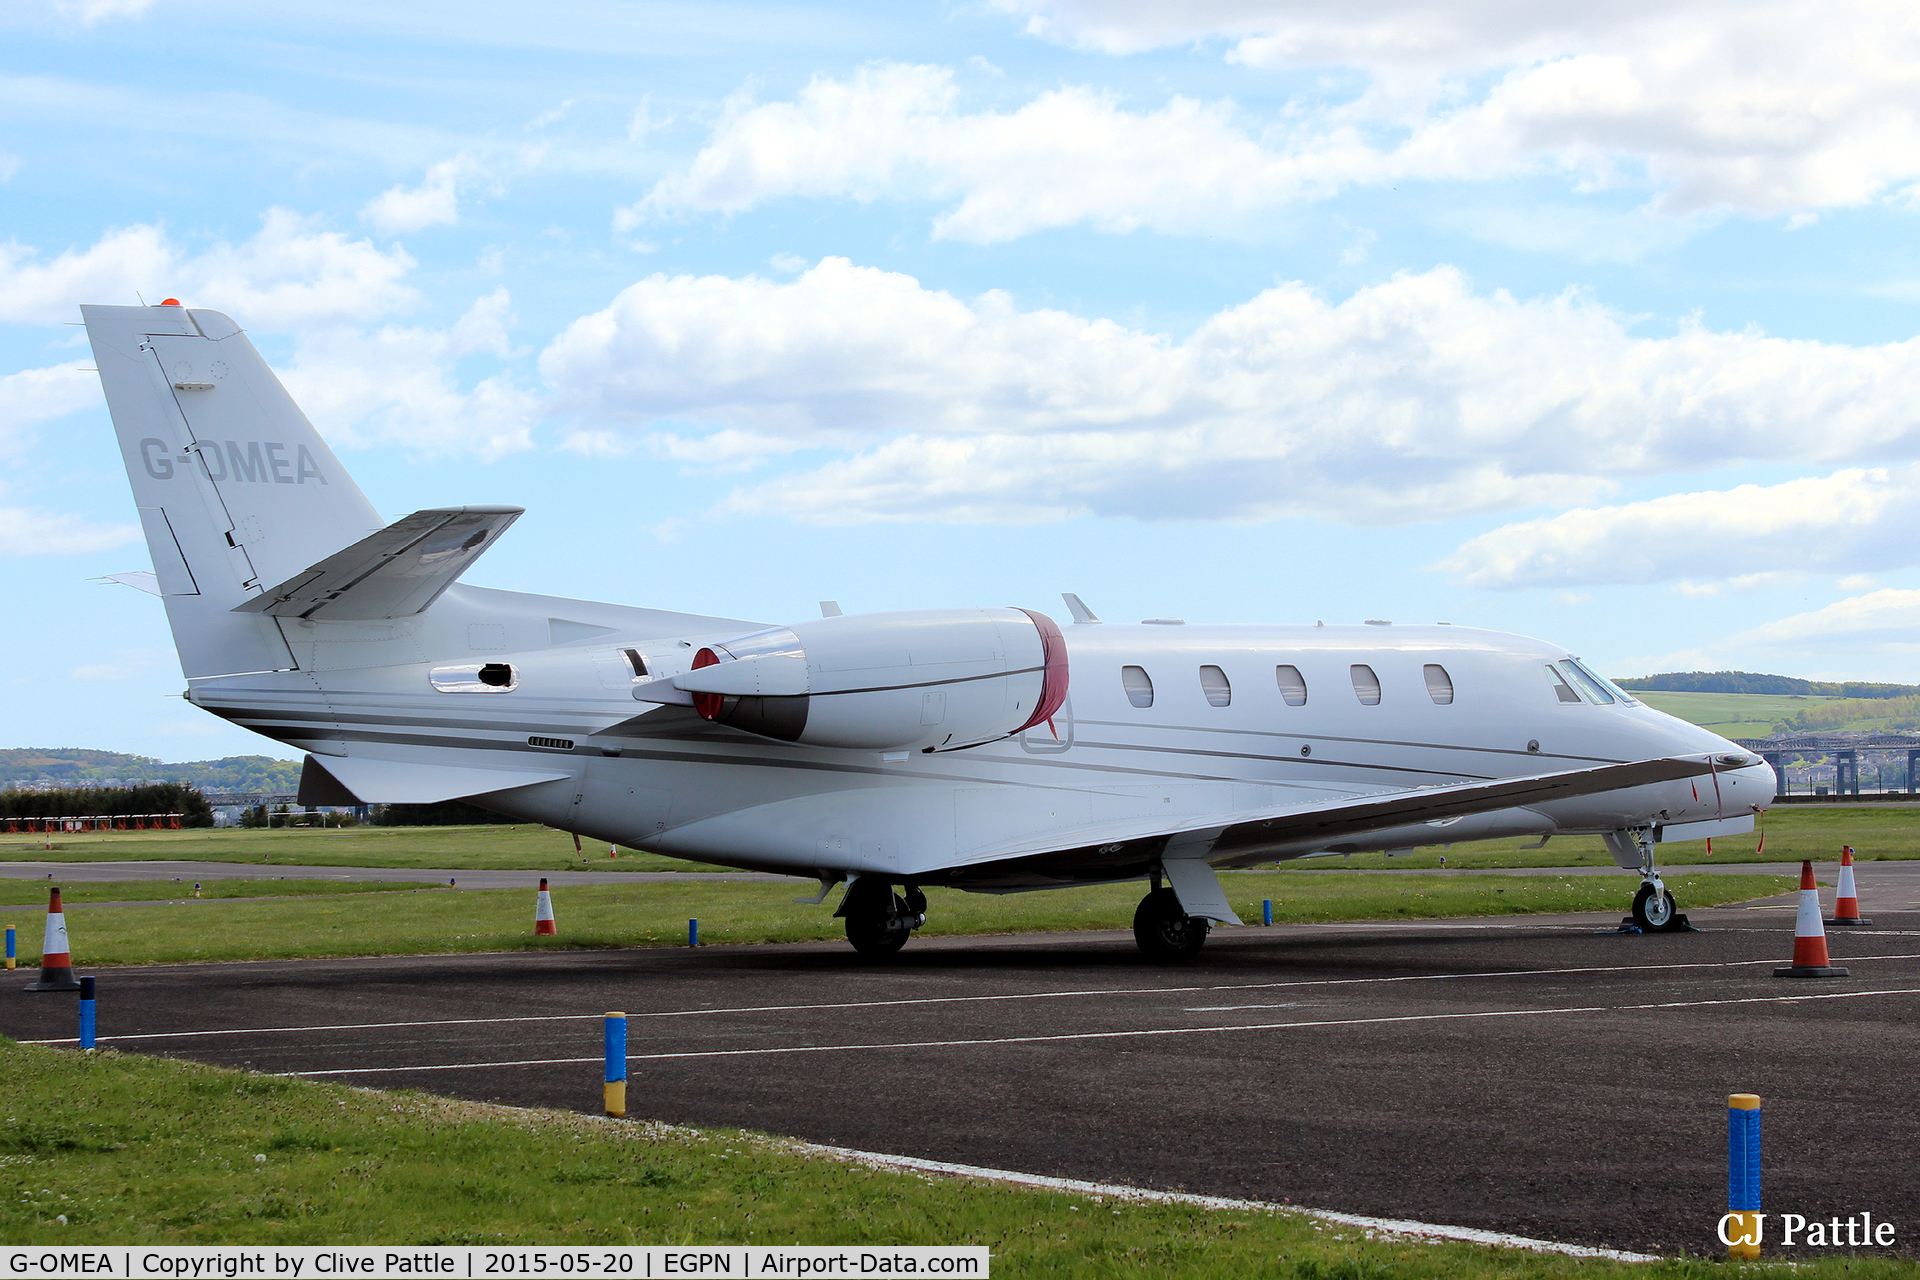 G-OMEA, 2006 Cessna 560XL Citation XLS C/N 560-5610, Another view of 'OMEA' at Dundee Airport EGPN